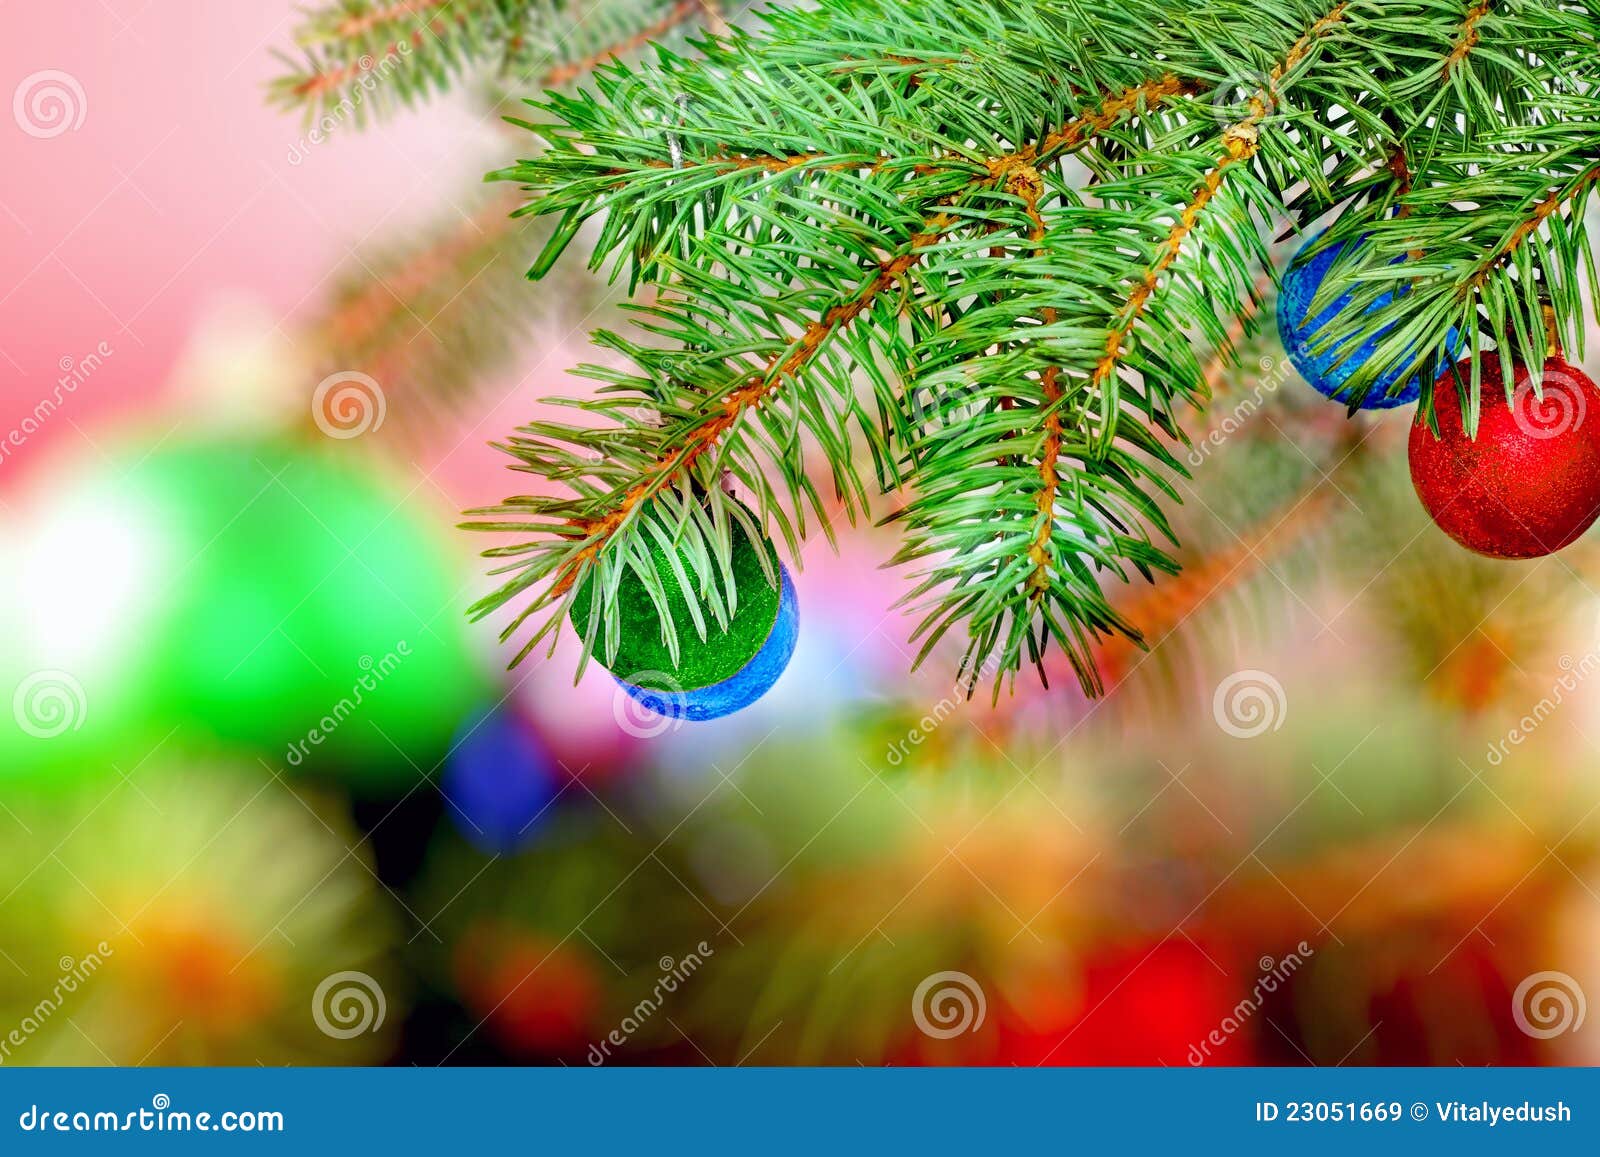 Christmas and New Year Decoration. Stock Image - Image of holiday ...